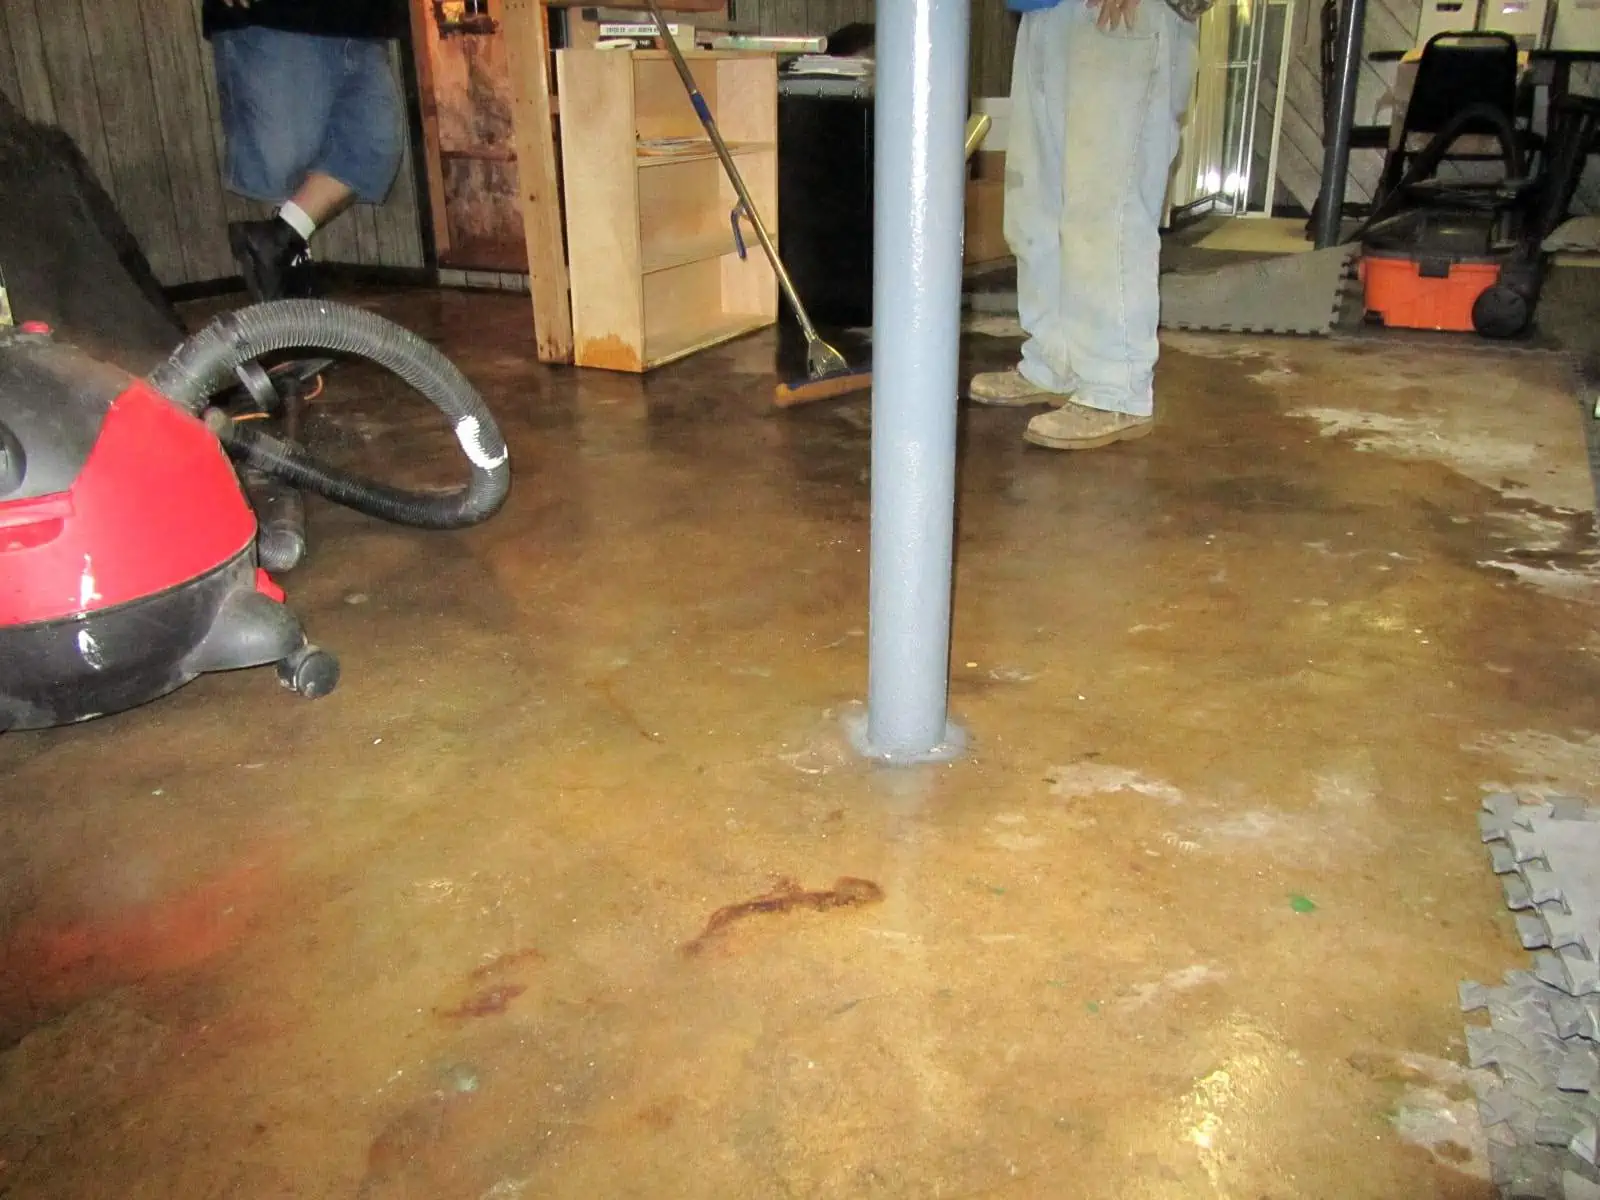 Water sensor alarm could have prevented an emergency drain service for flooded basement